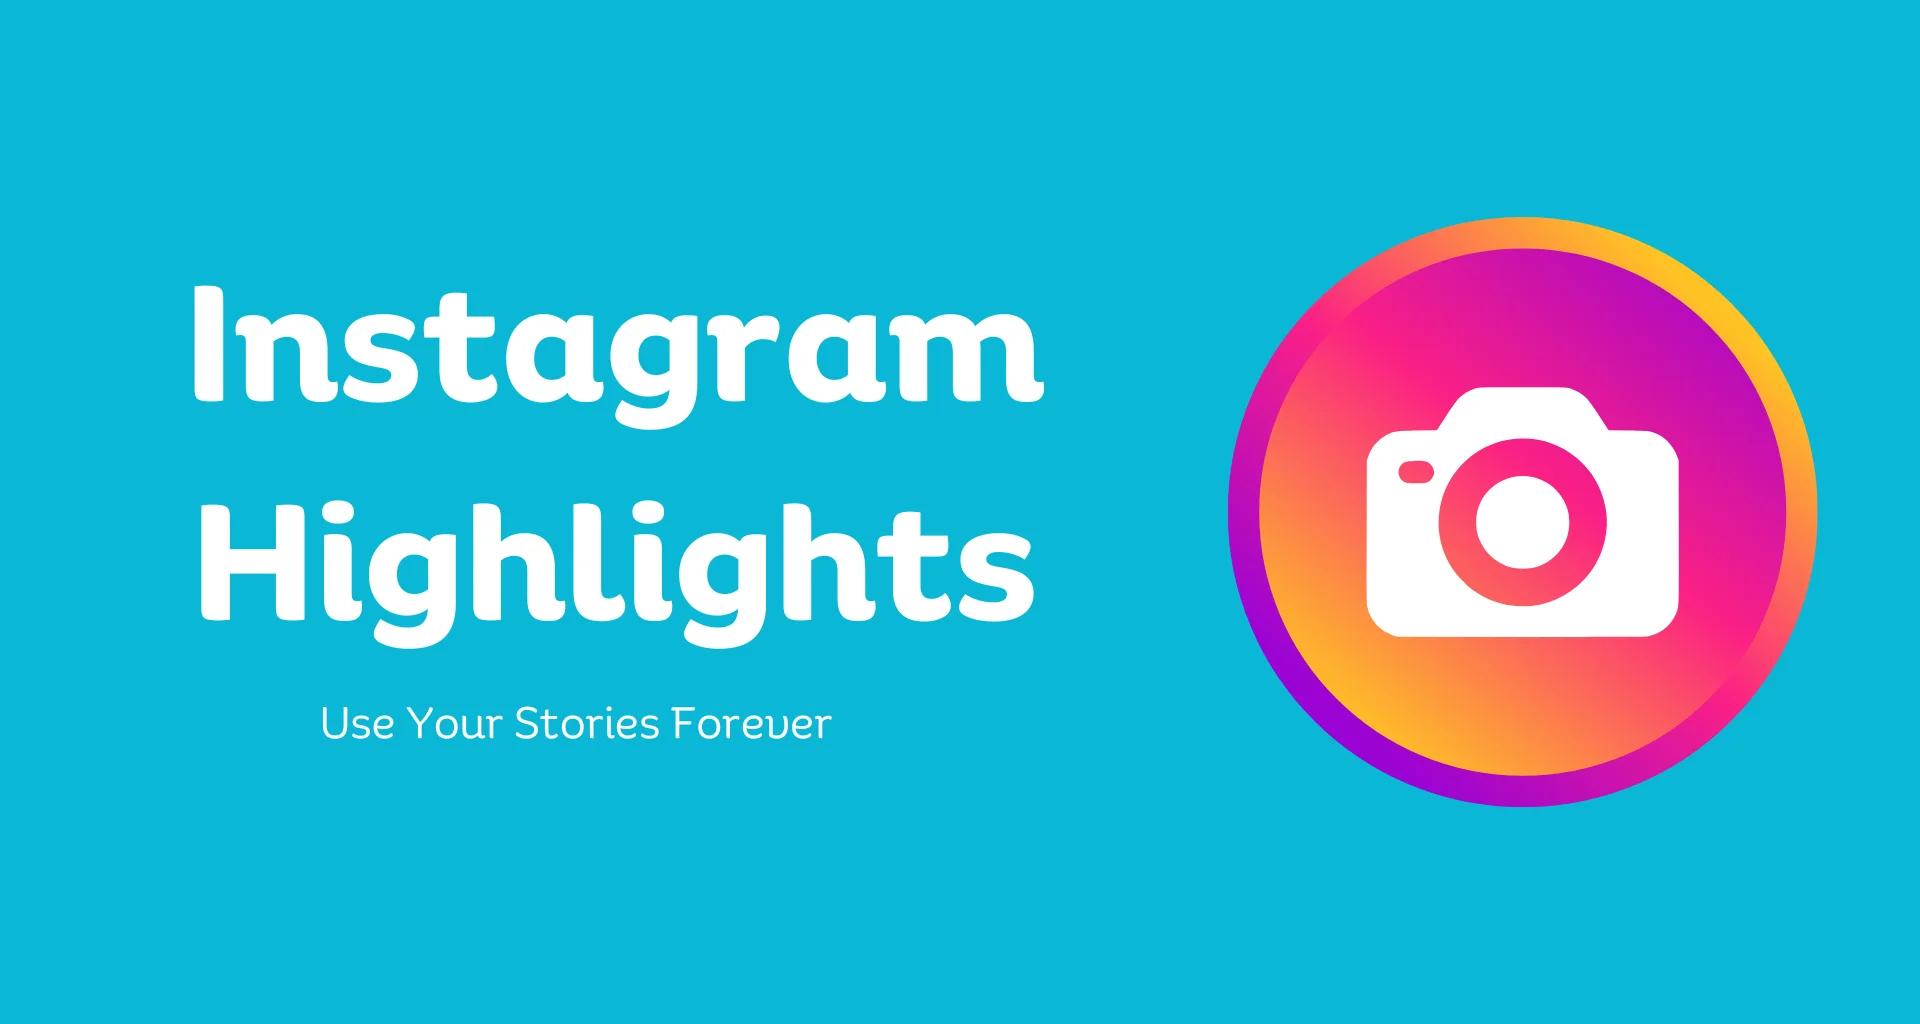 Instagram Highlights Use Your Stories Forever